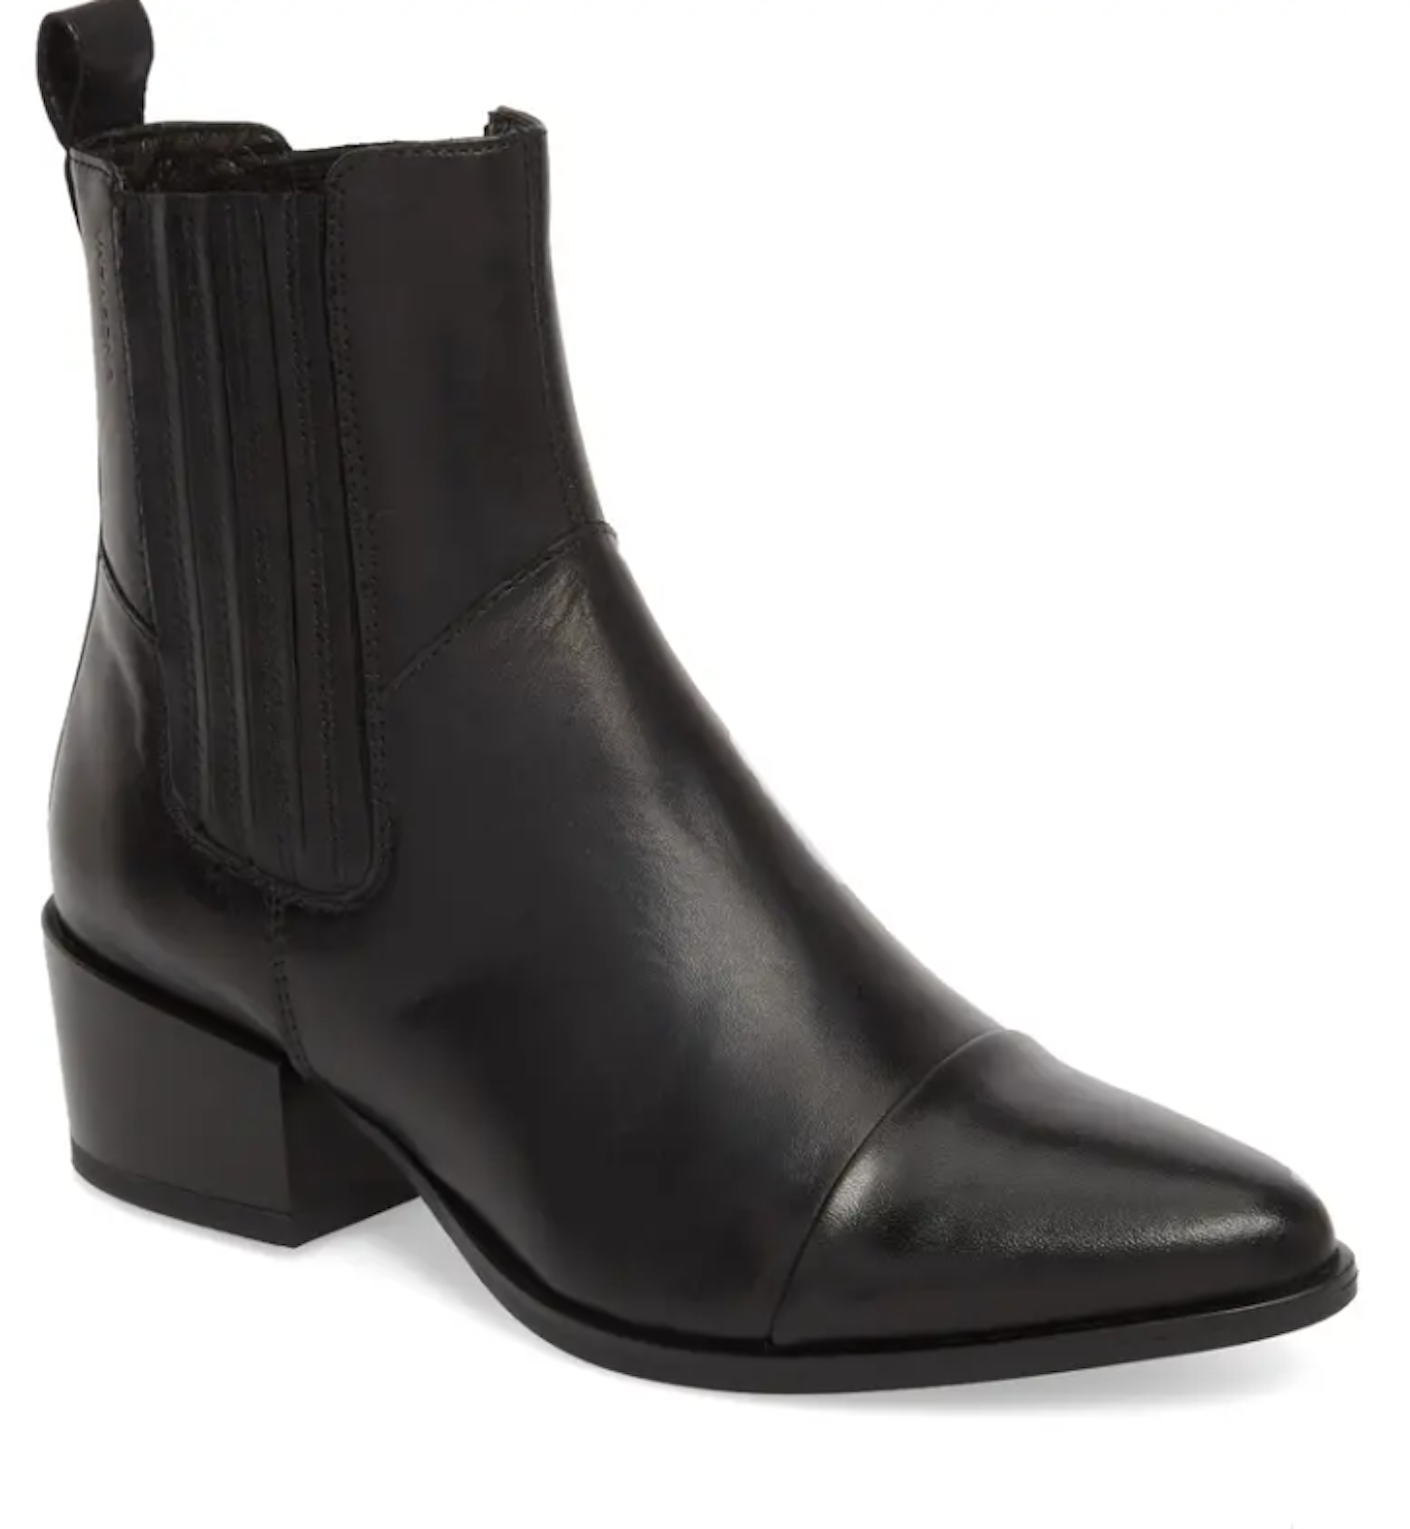 A pair of black leather ankle booties with pointed toes and a 2.5 inch heel pictured in front of a white background.